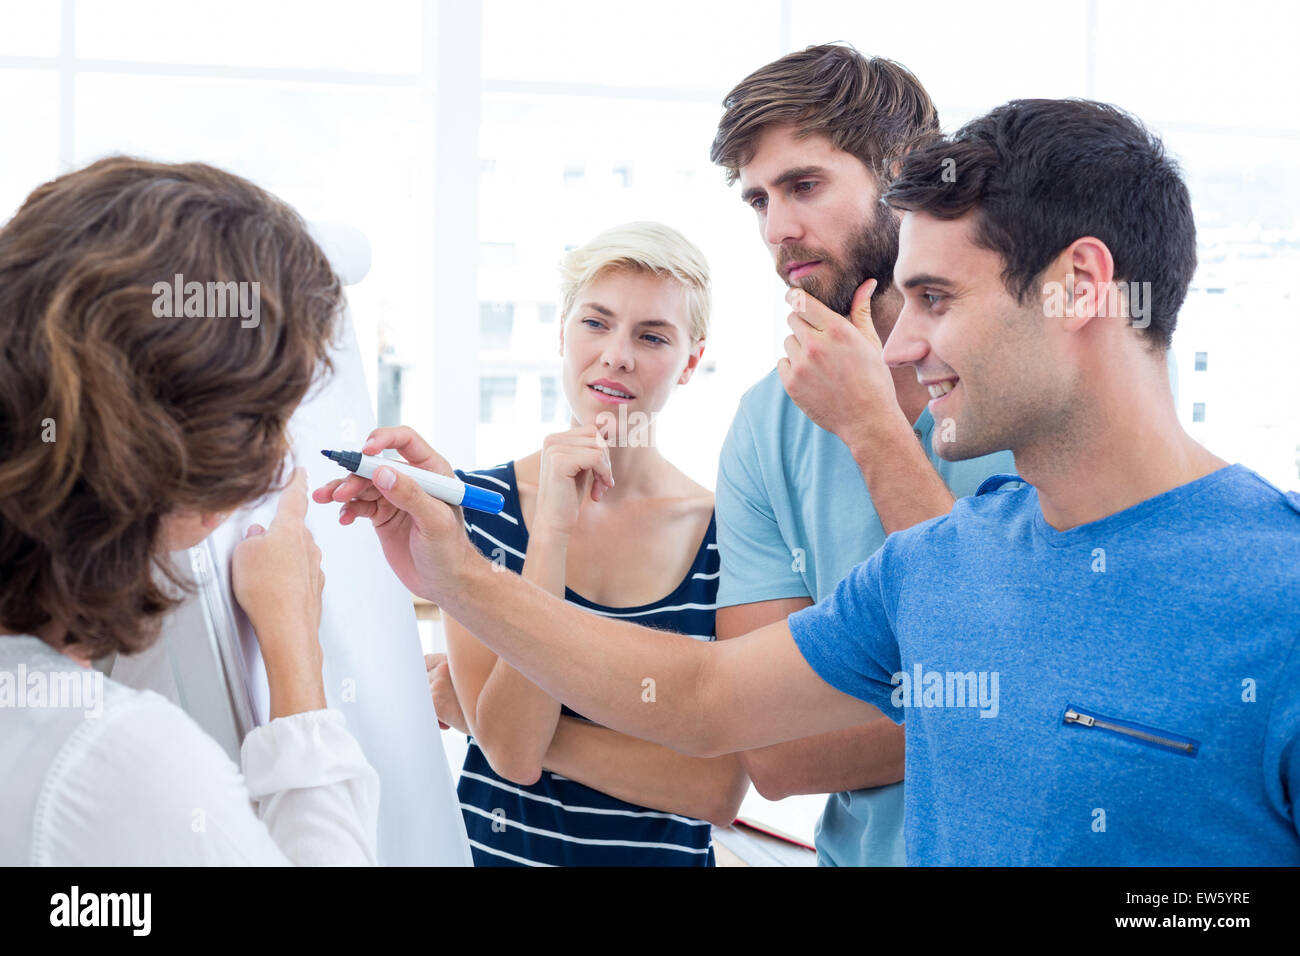 Creative business team in meeting Stock Photo